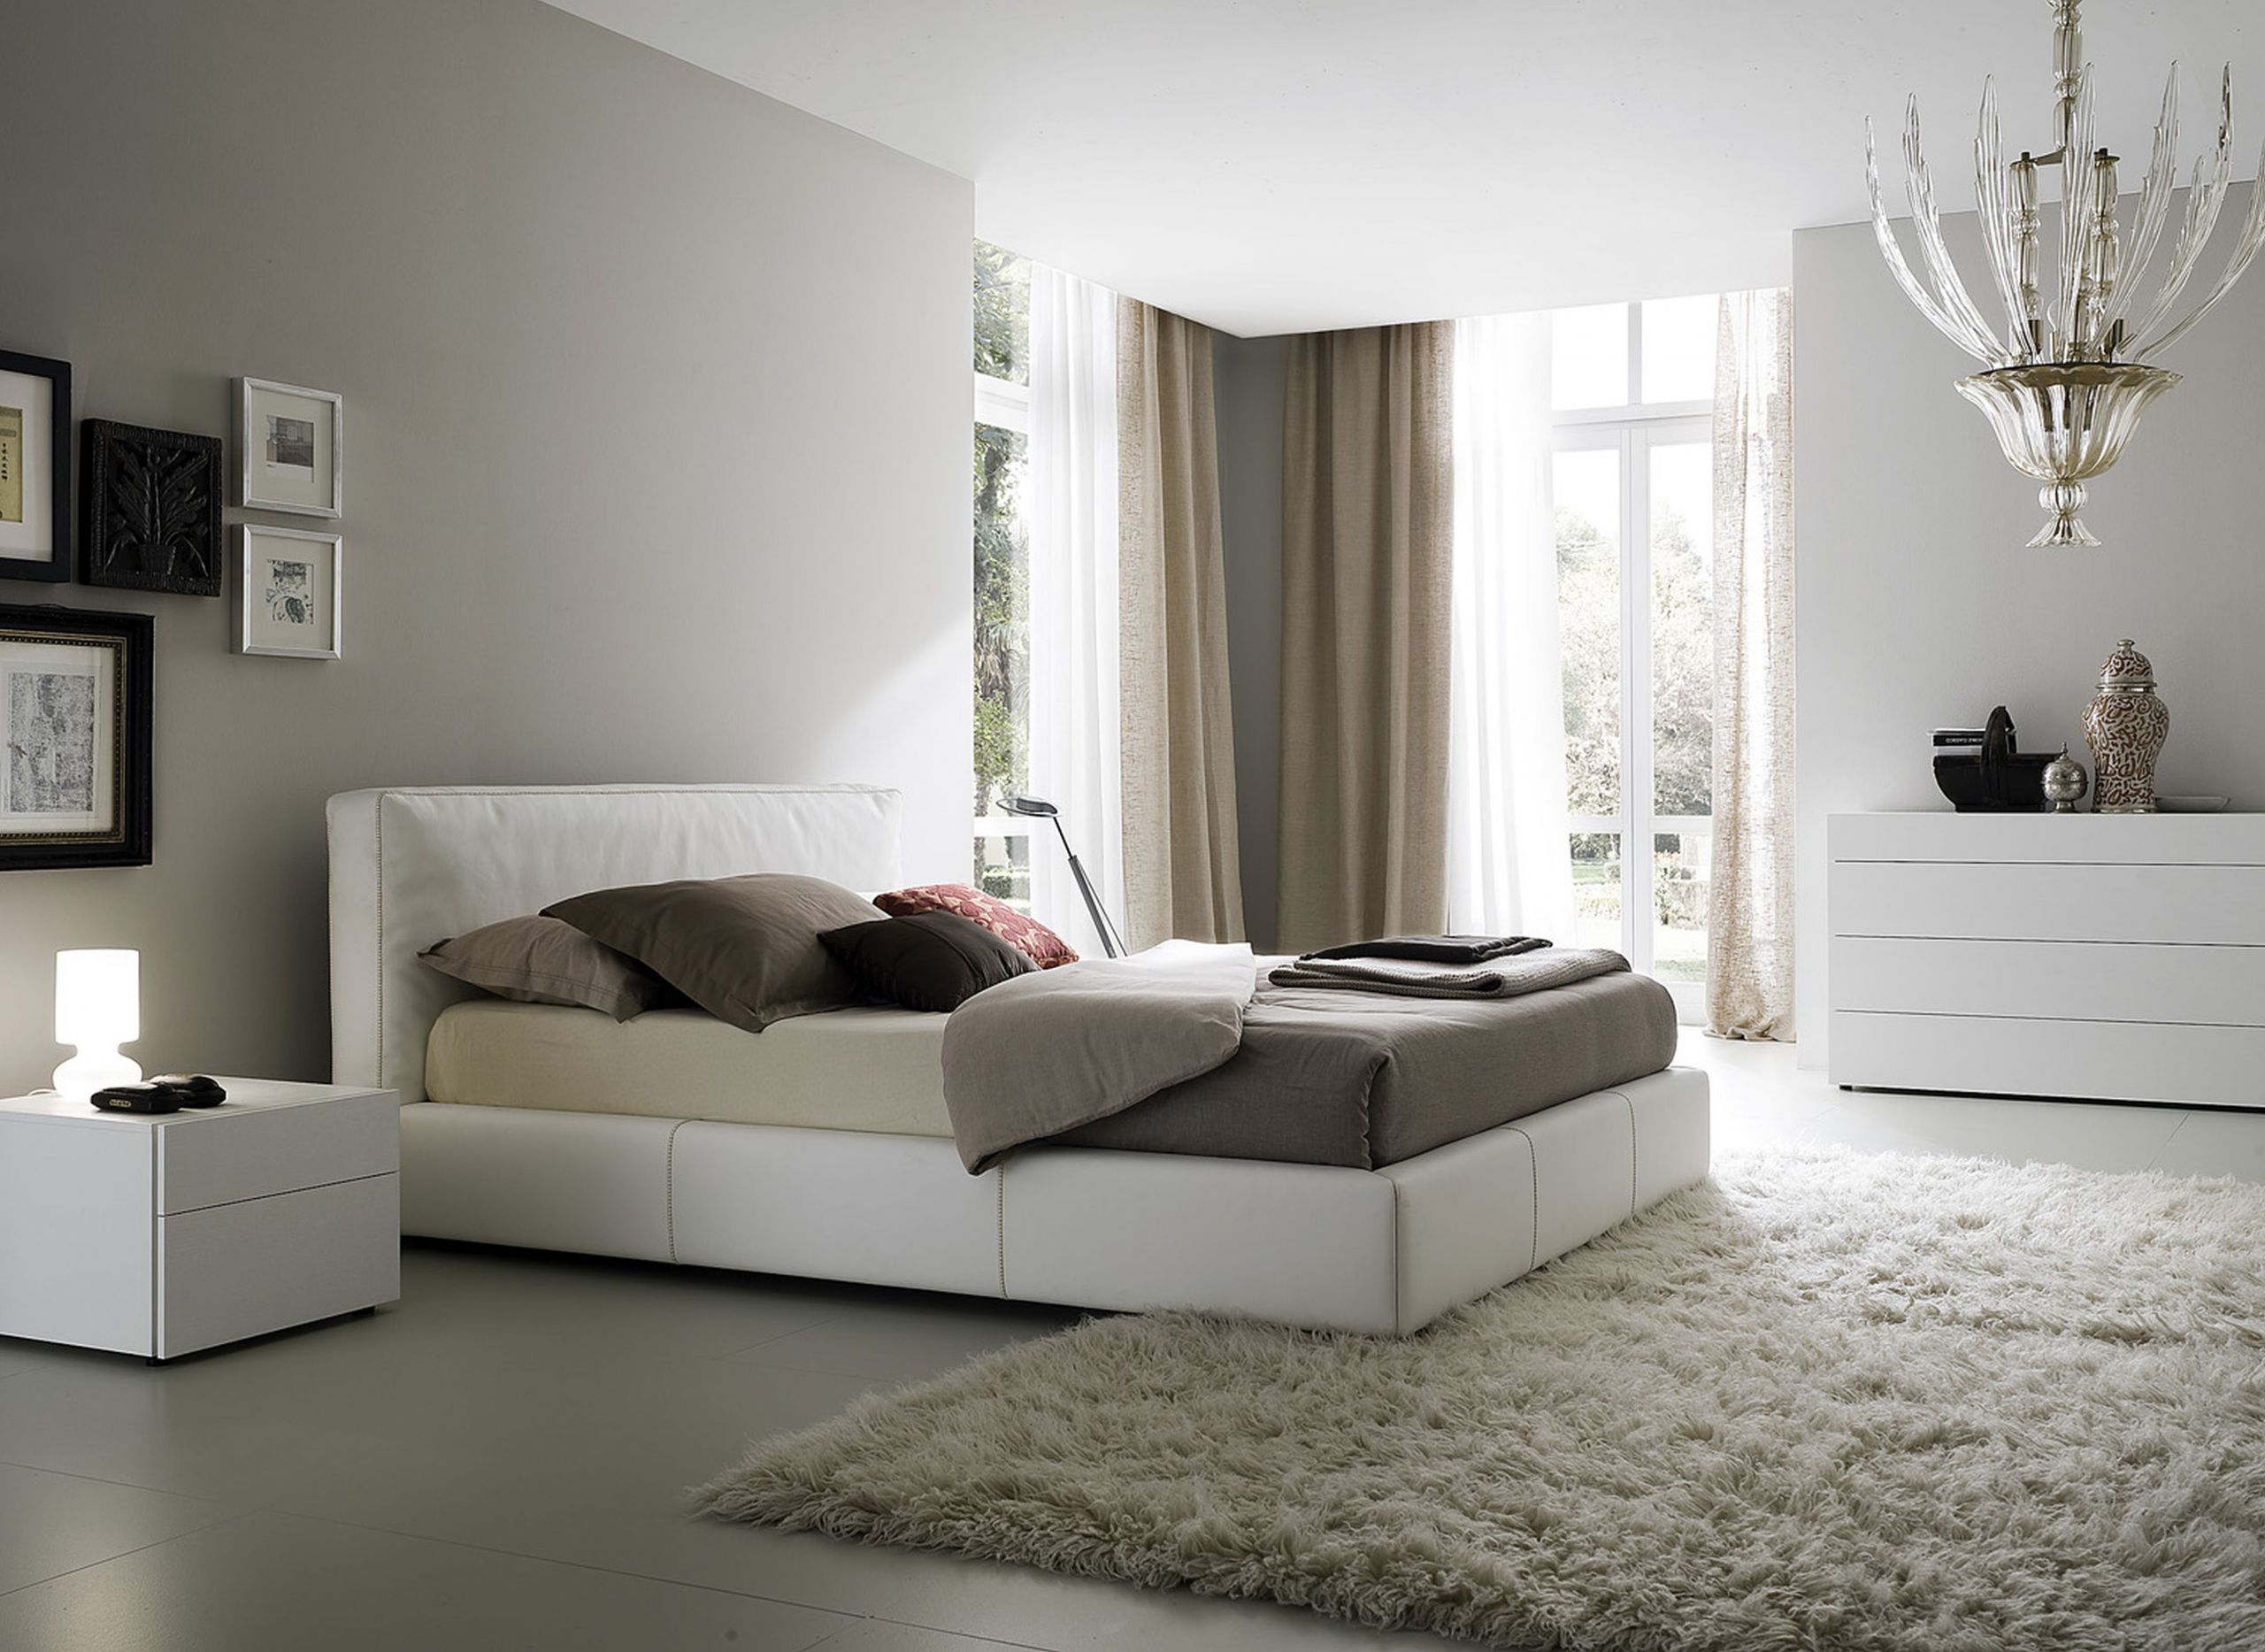 Modern Chic Bedroom Ideas
 40 Modern Bedroom For Your Home – The WoW Style